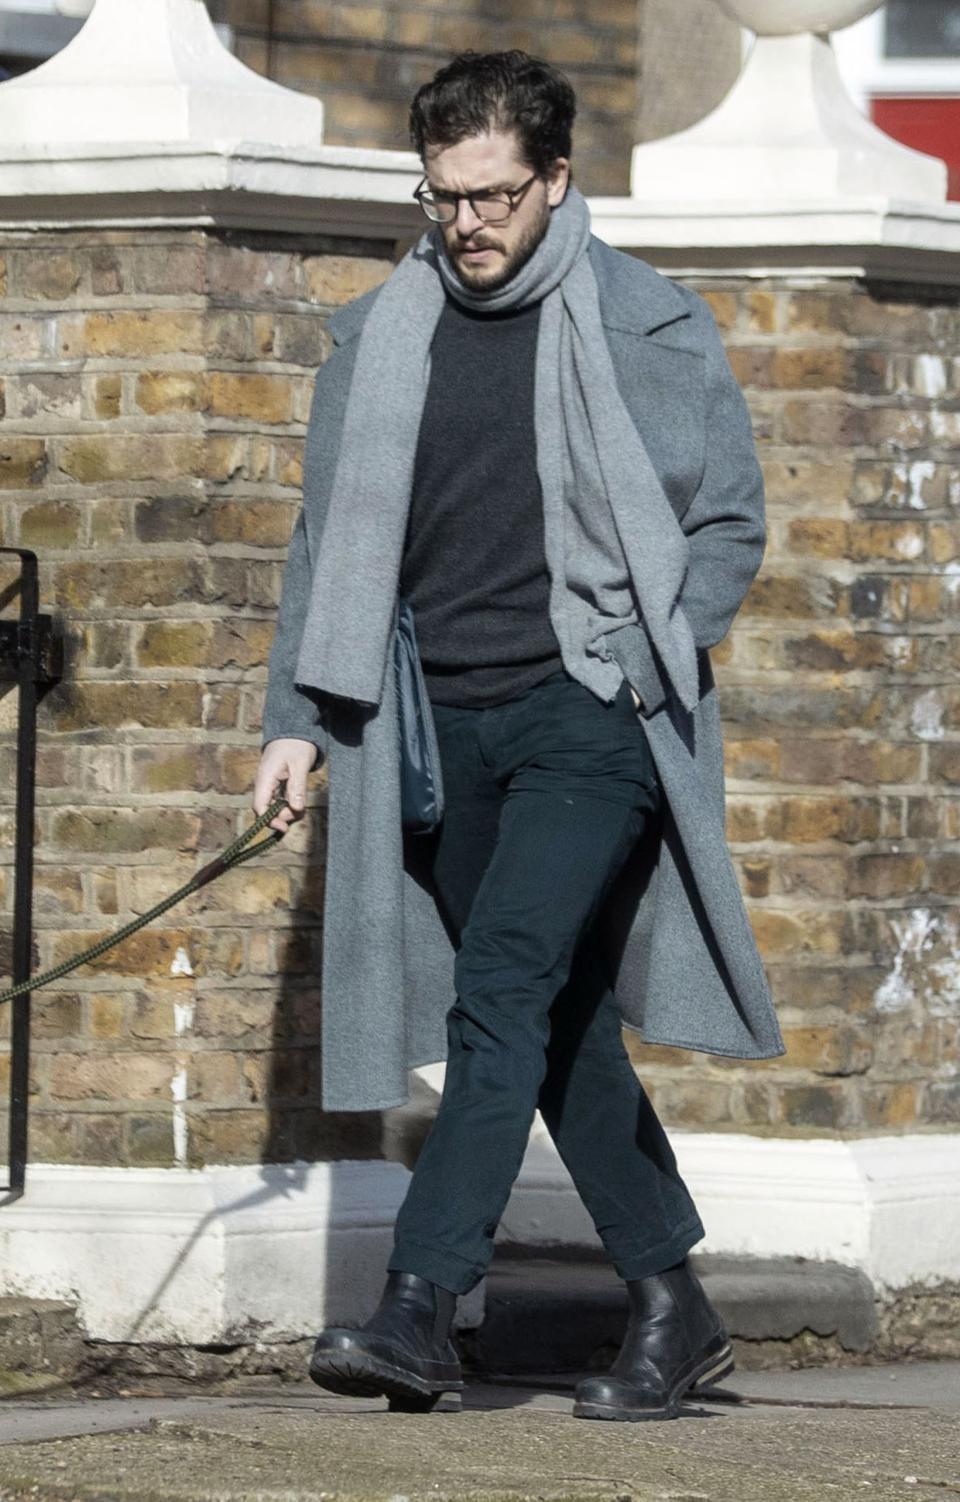 <h1 class="title"><em>EXCLUSIVE</em> Kit Harington pictured out and about in North London with his beloved pet dog</h1><cite class="credit">XPOS / Backgrid</cite>